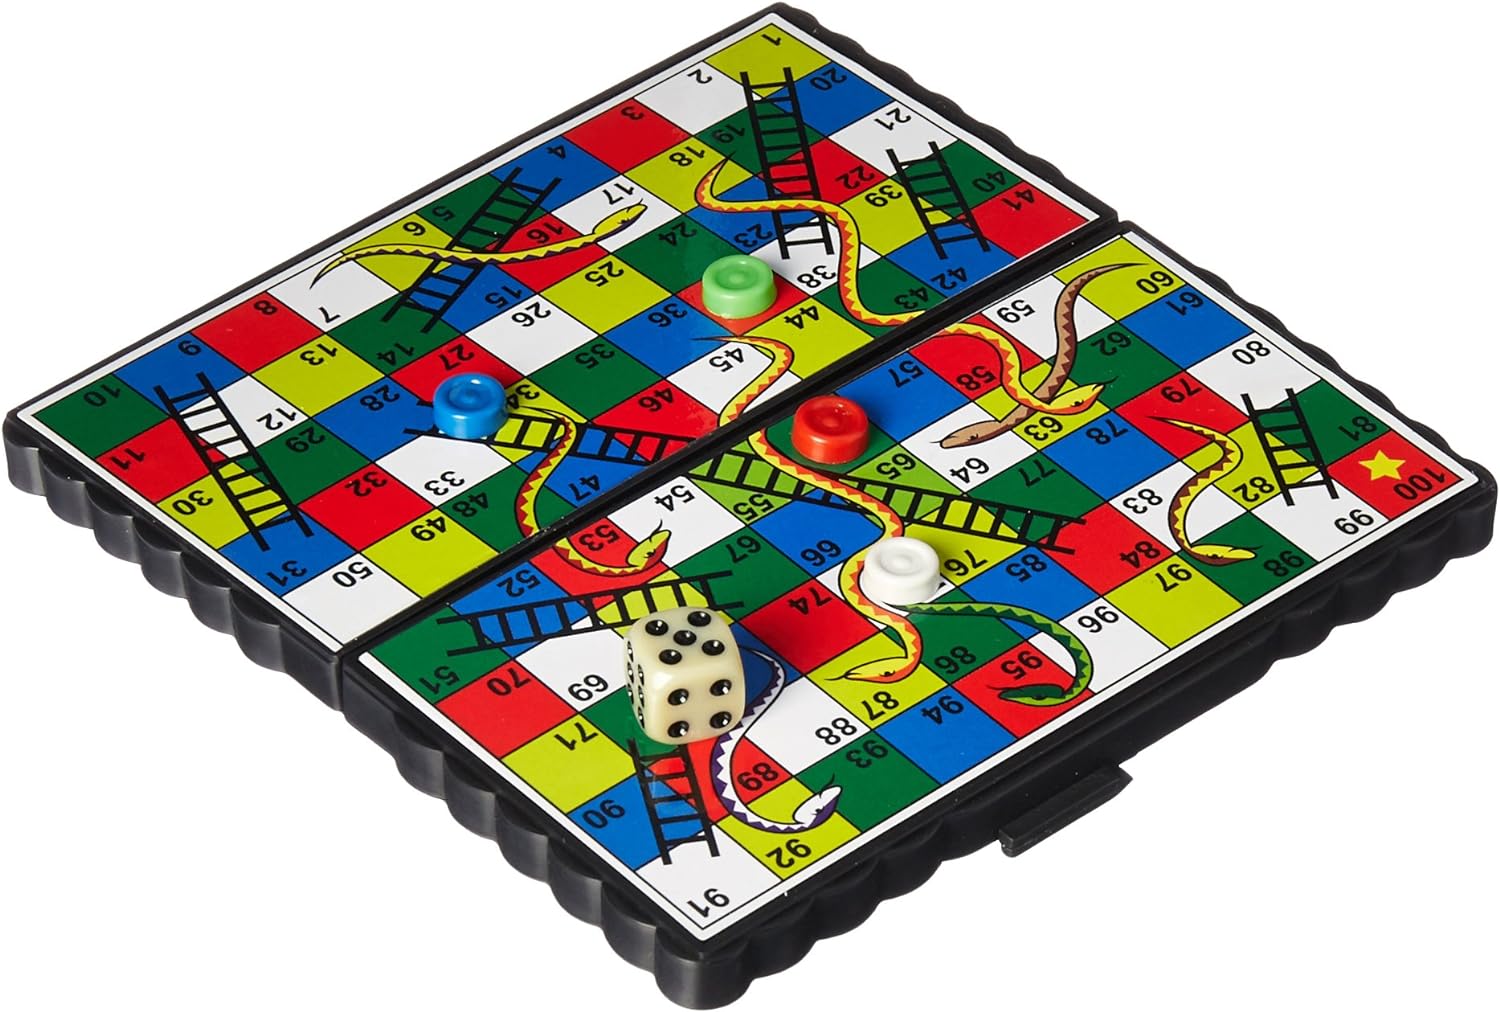 House of Marbles Magnetic Snakes & Ladders